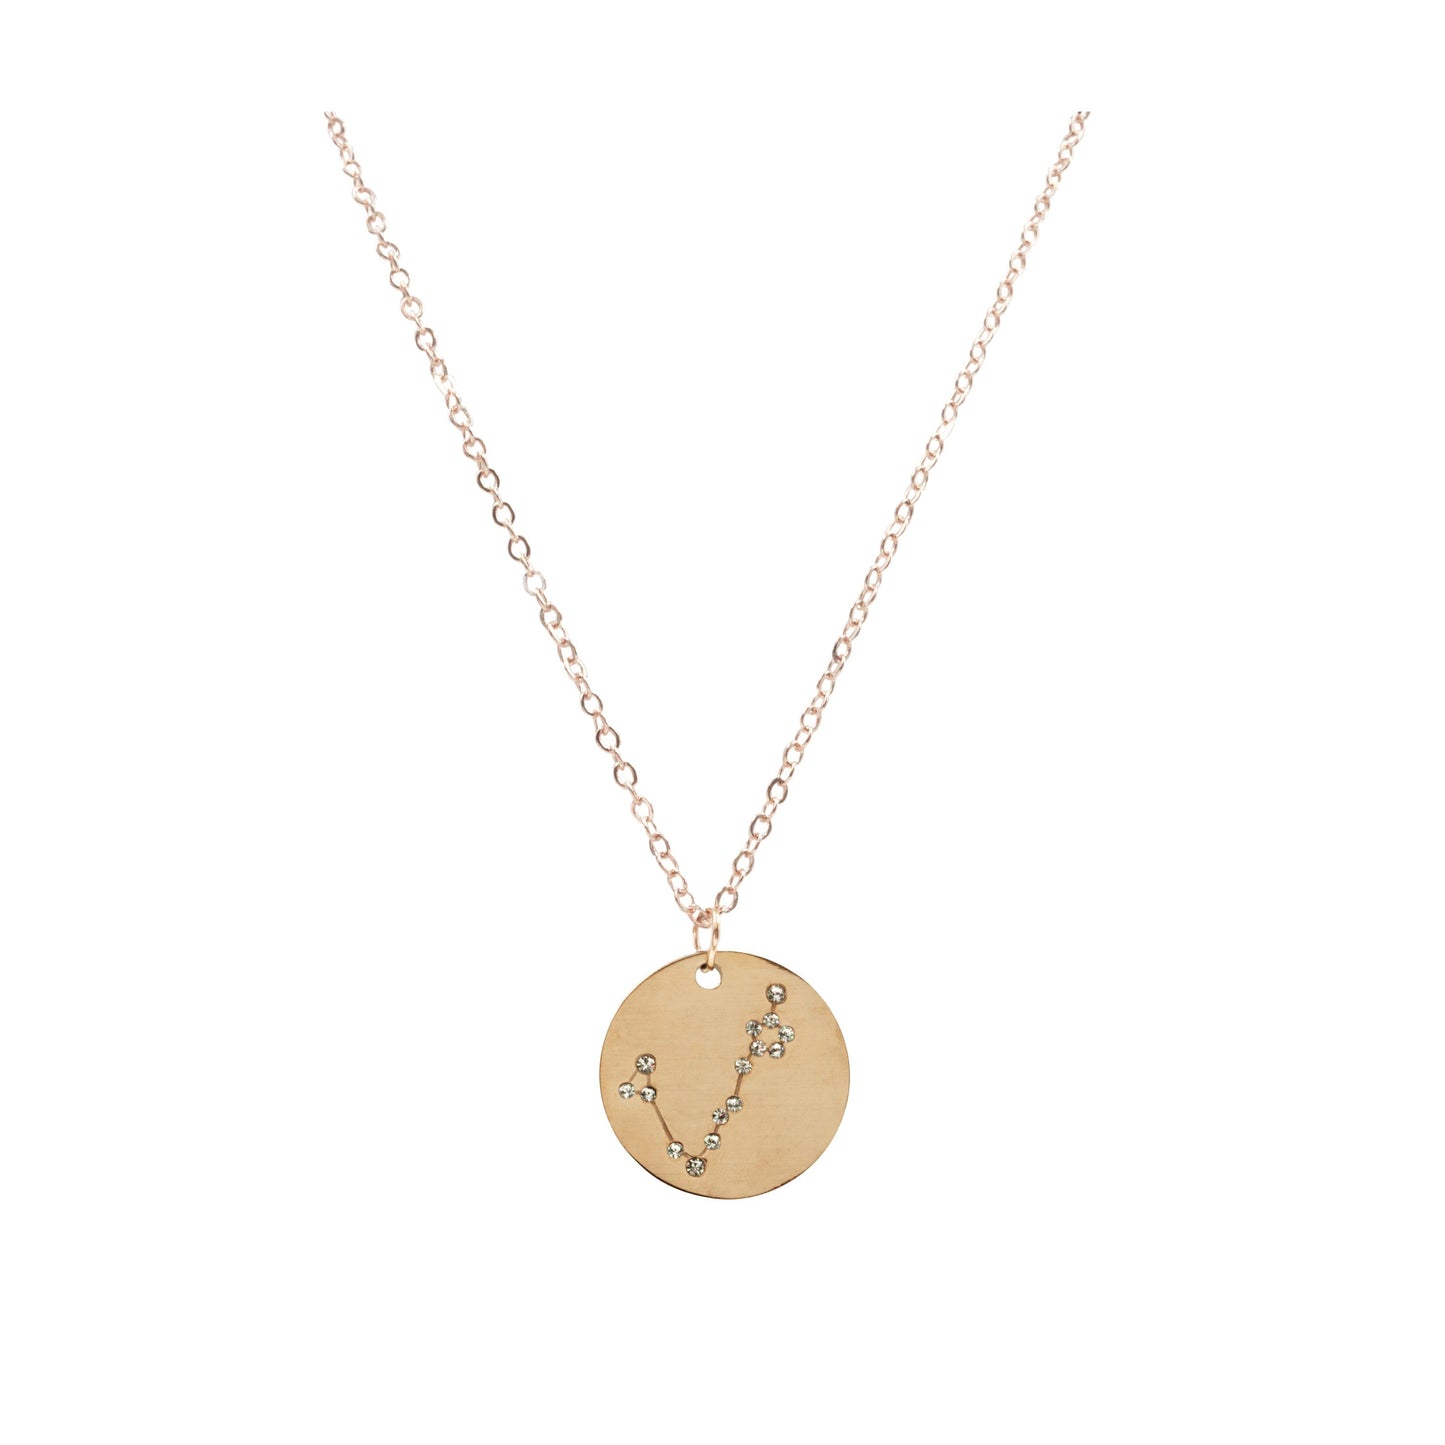 Zodiac Collection - Rose Gold Pisces Necklace (Feb 19 - Mar 20)